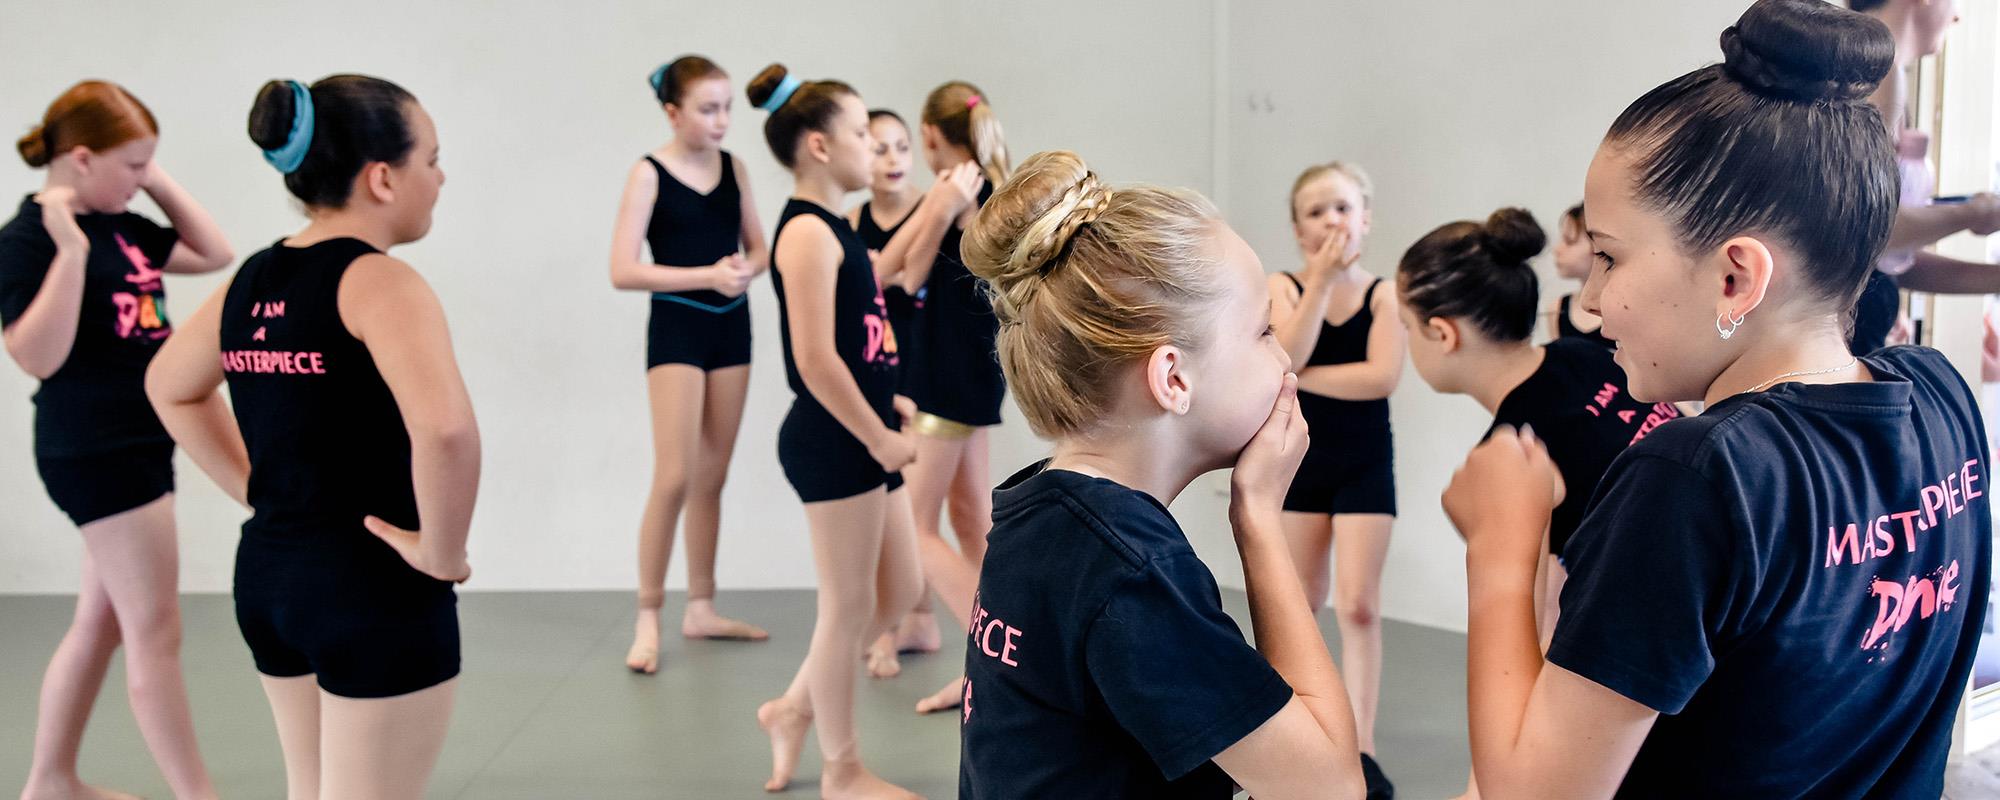 Classes at Masterpiece Dance